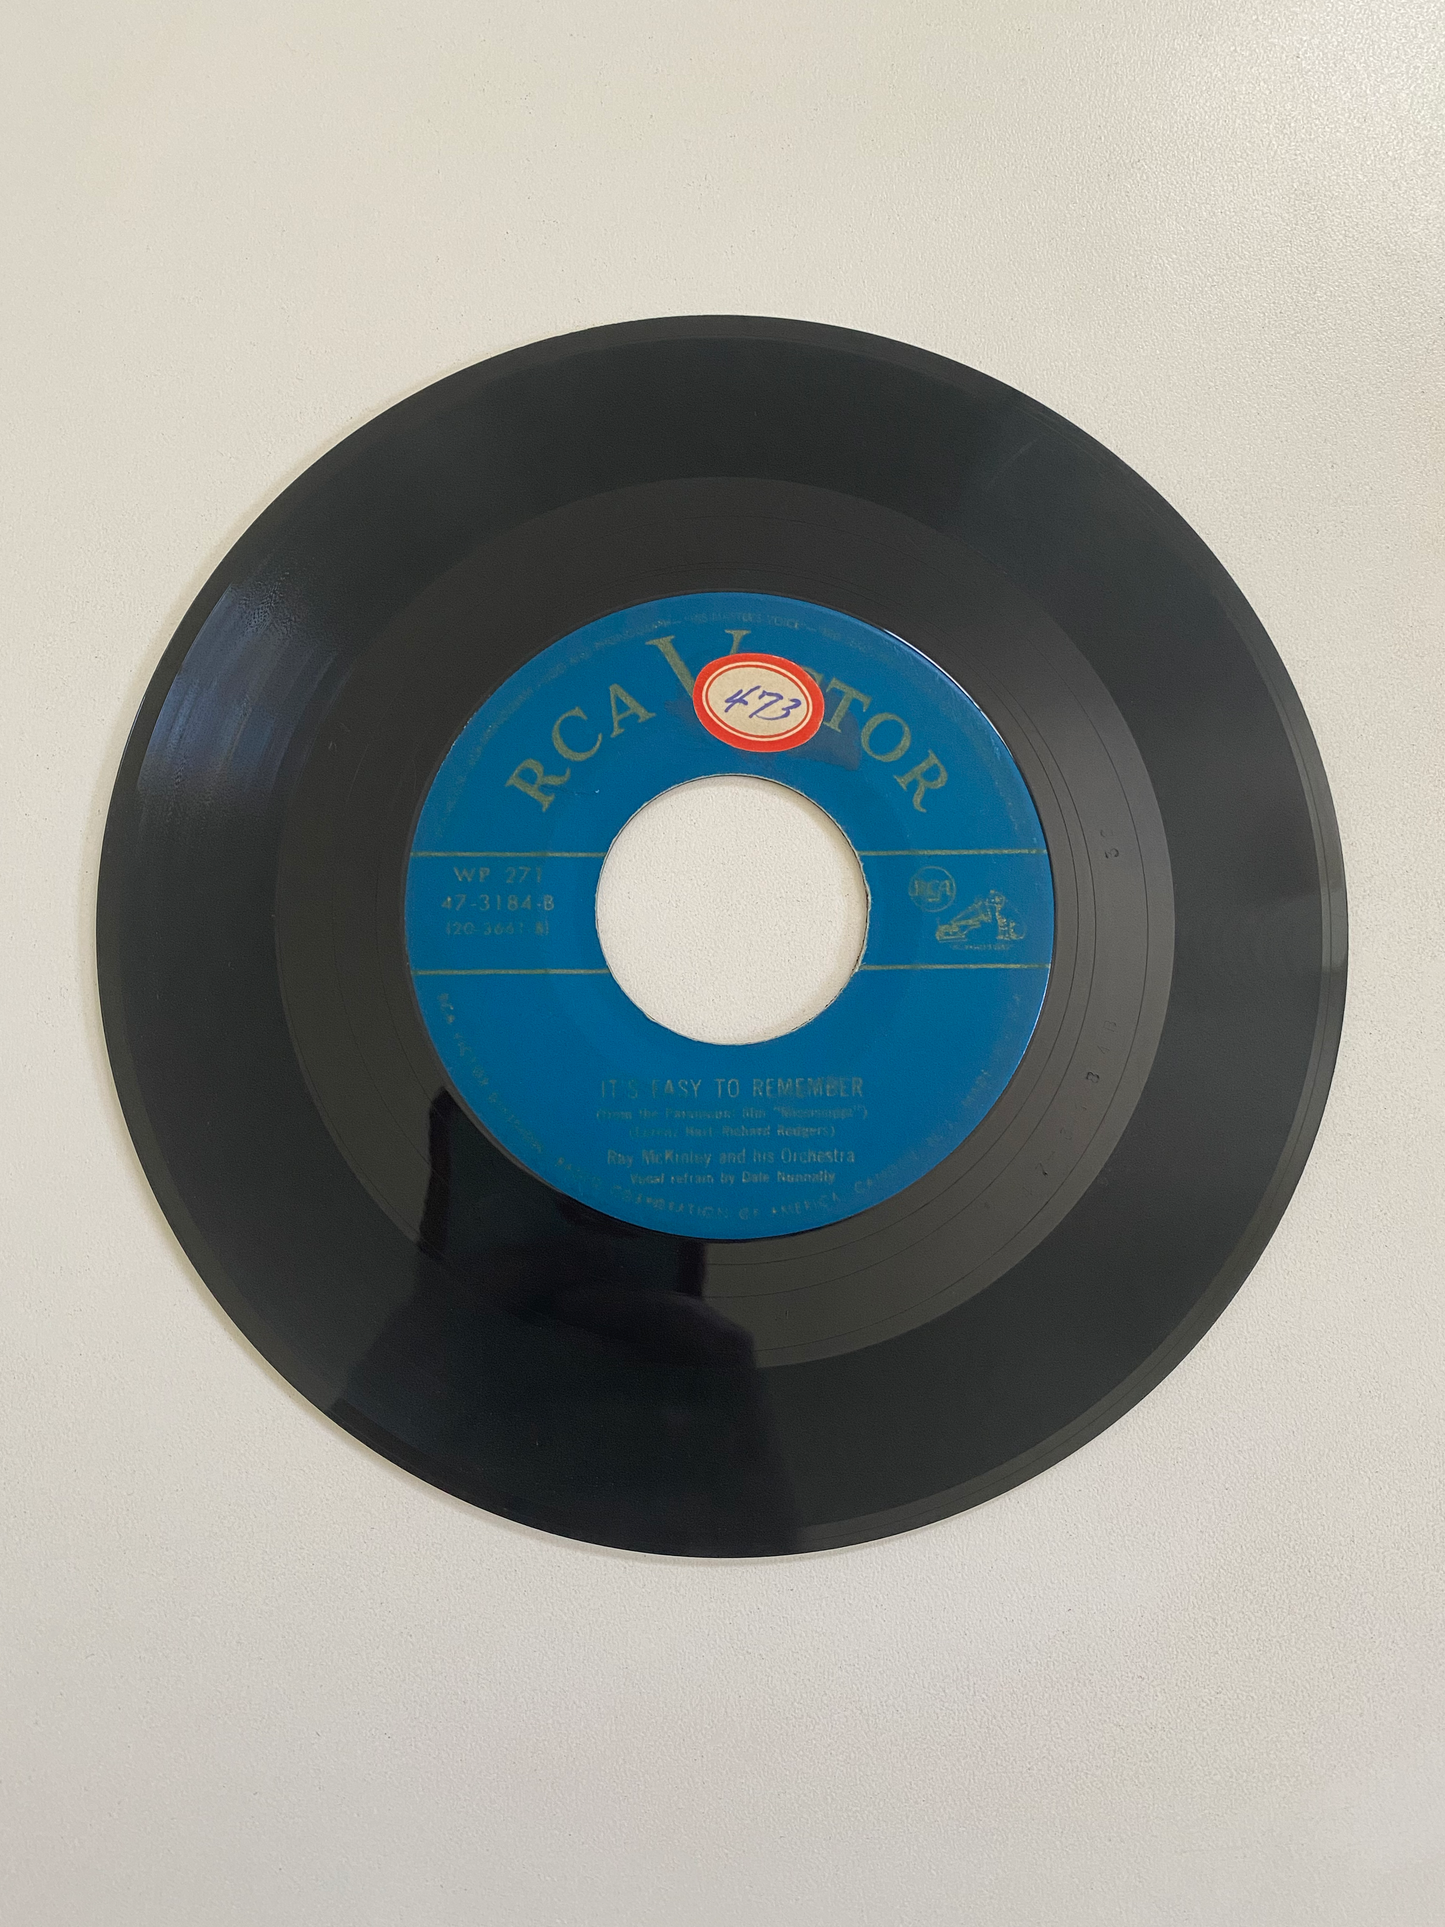 Ray McKinley and his Orchestra - You Took Advantage of Me | 45 The Vintedge Co.